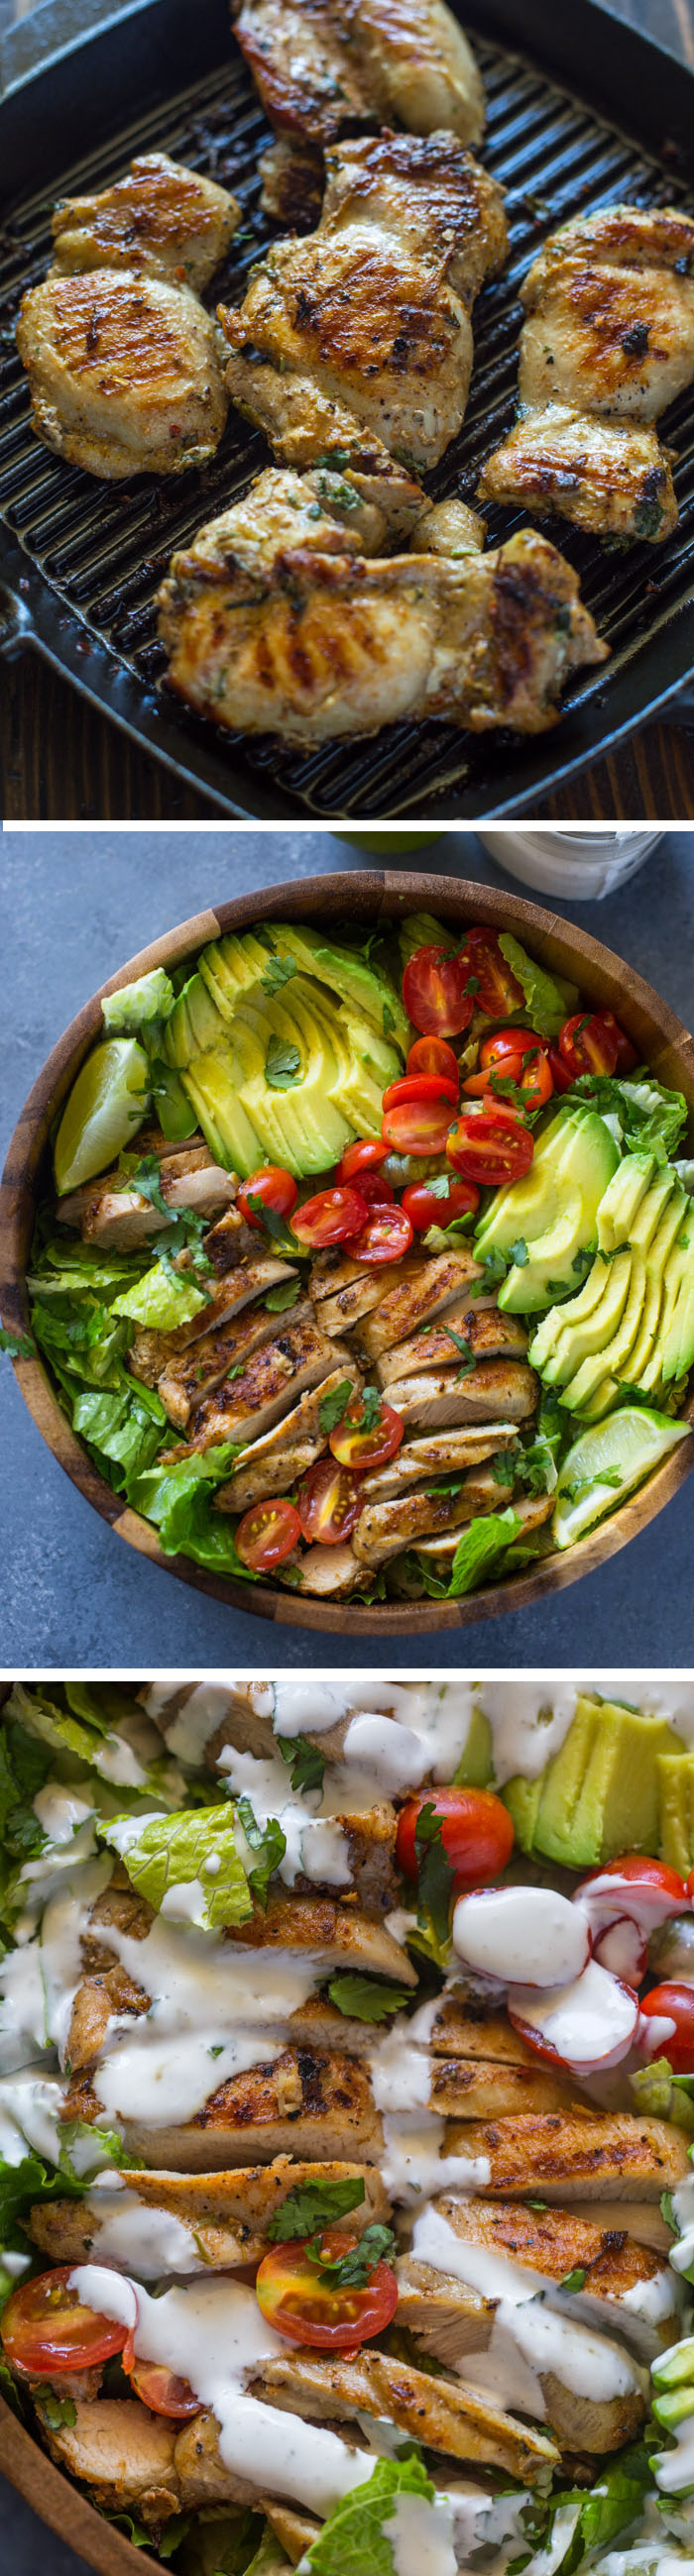 Chicken and Avocado Salad with Skinny Creamy Dressing